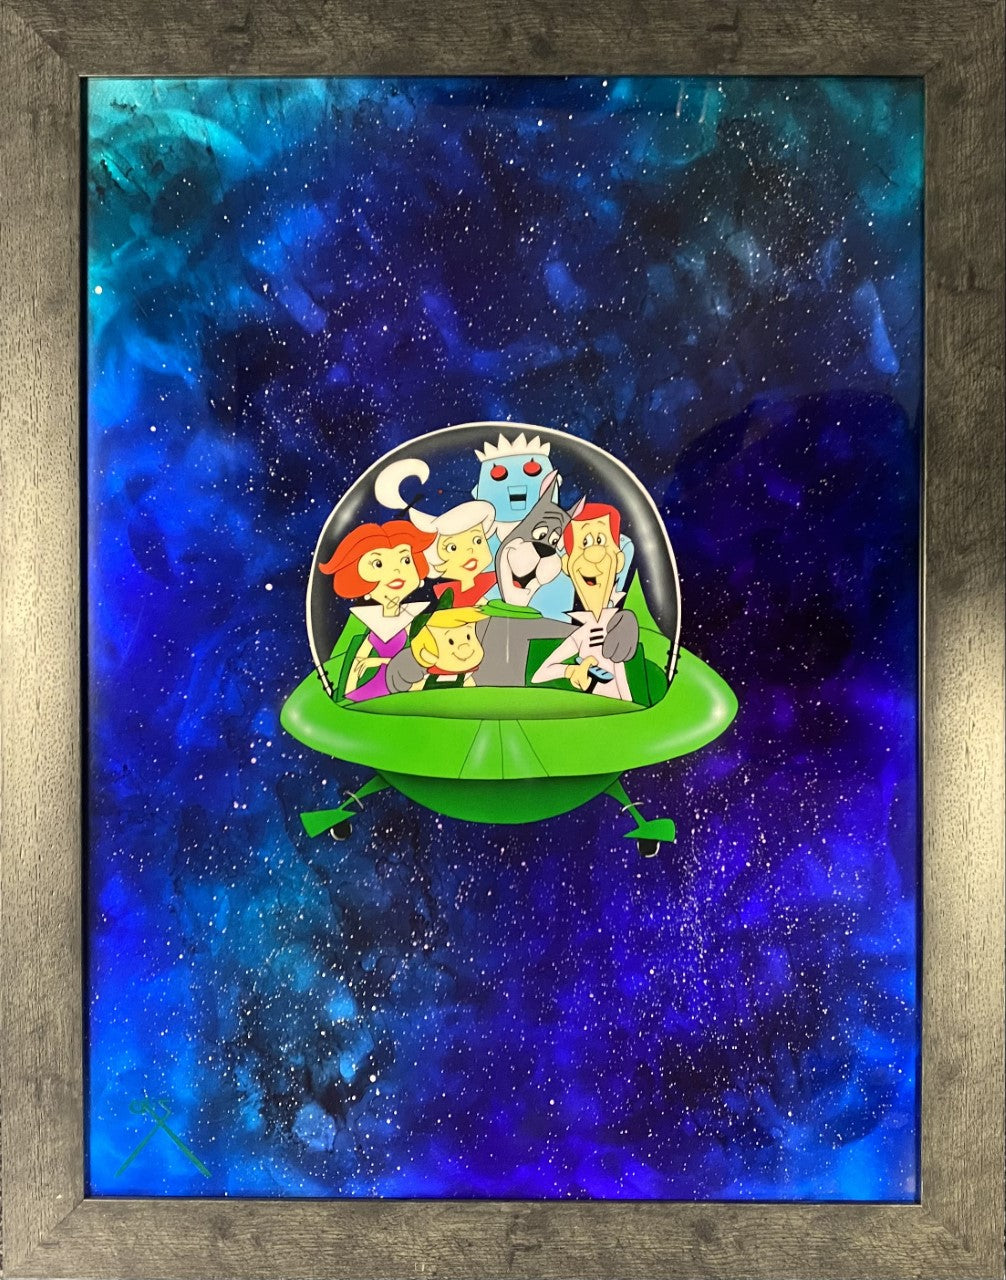 The Jetsons in Outer Space by Cris Woloszak inspired by The Jetsons